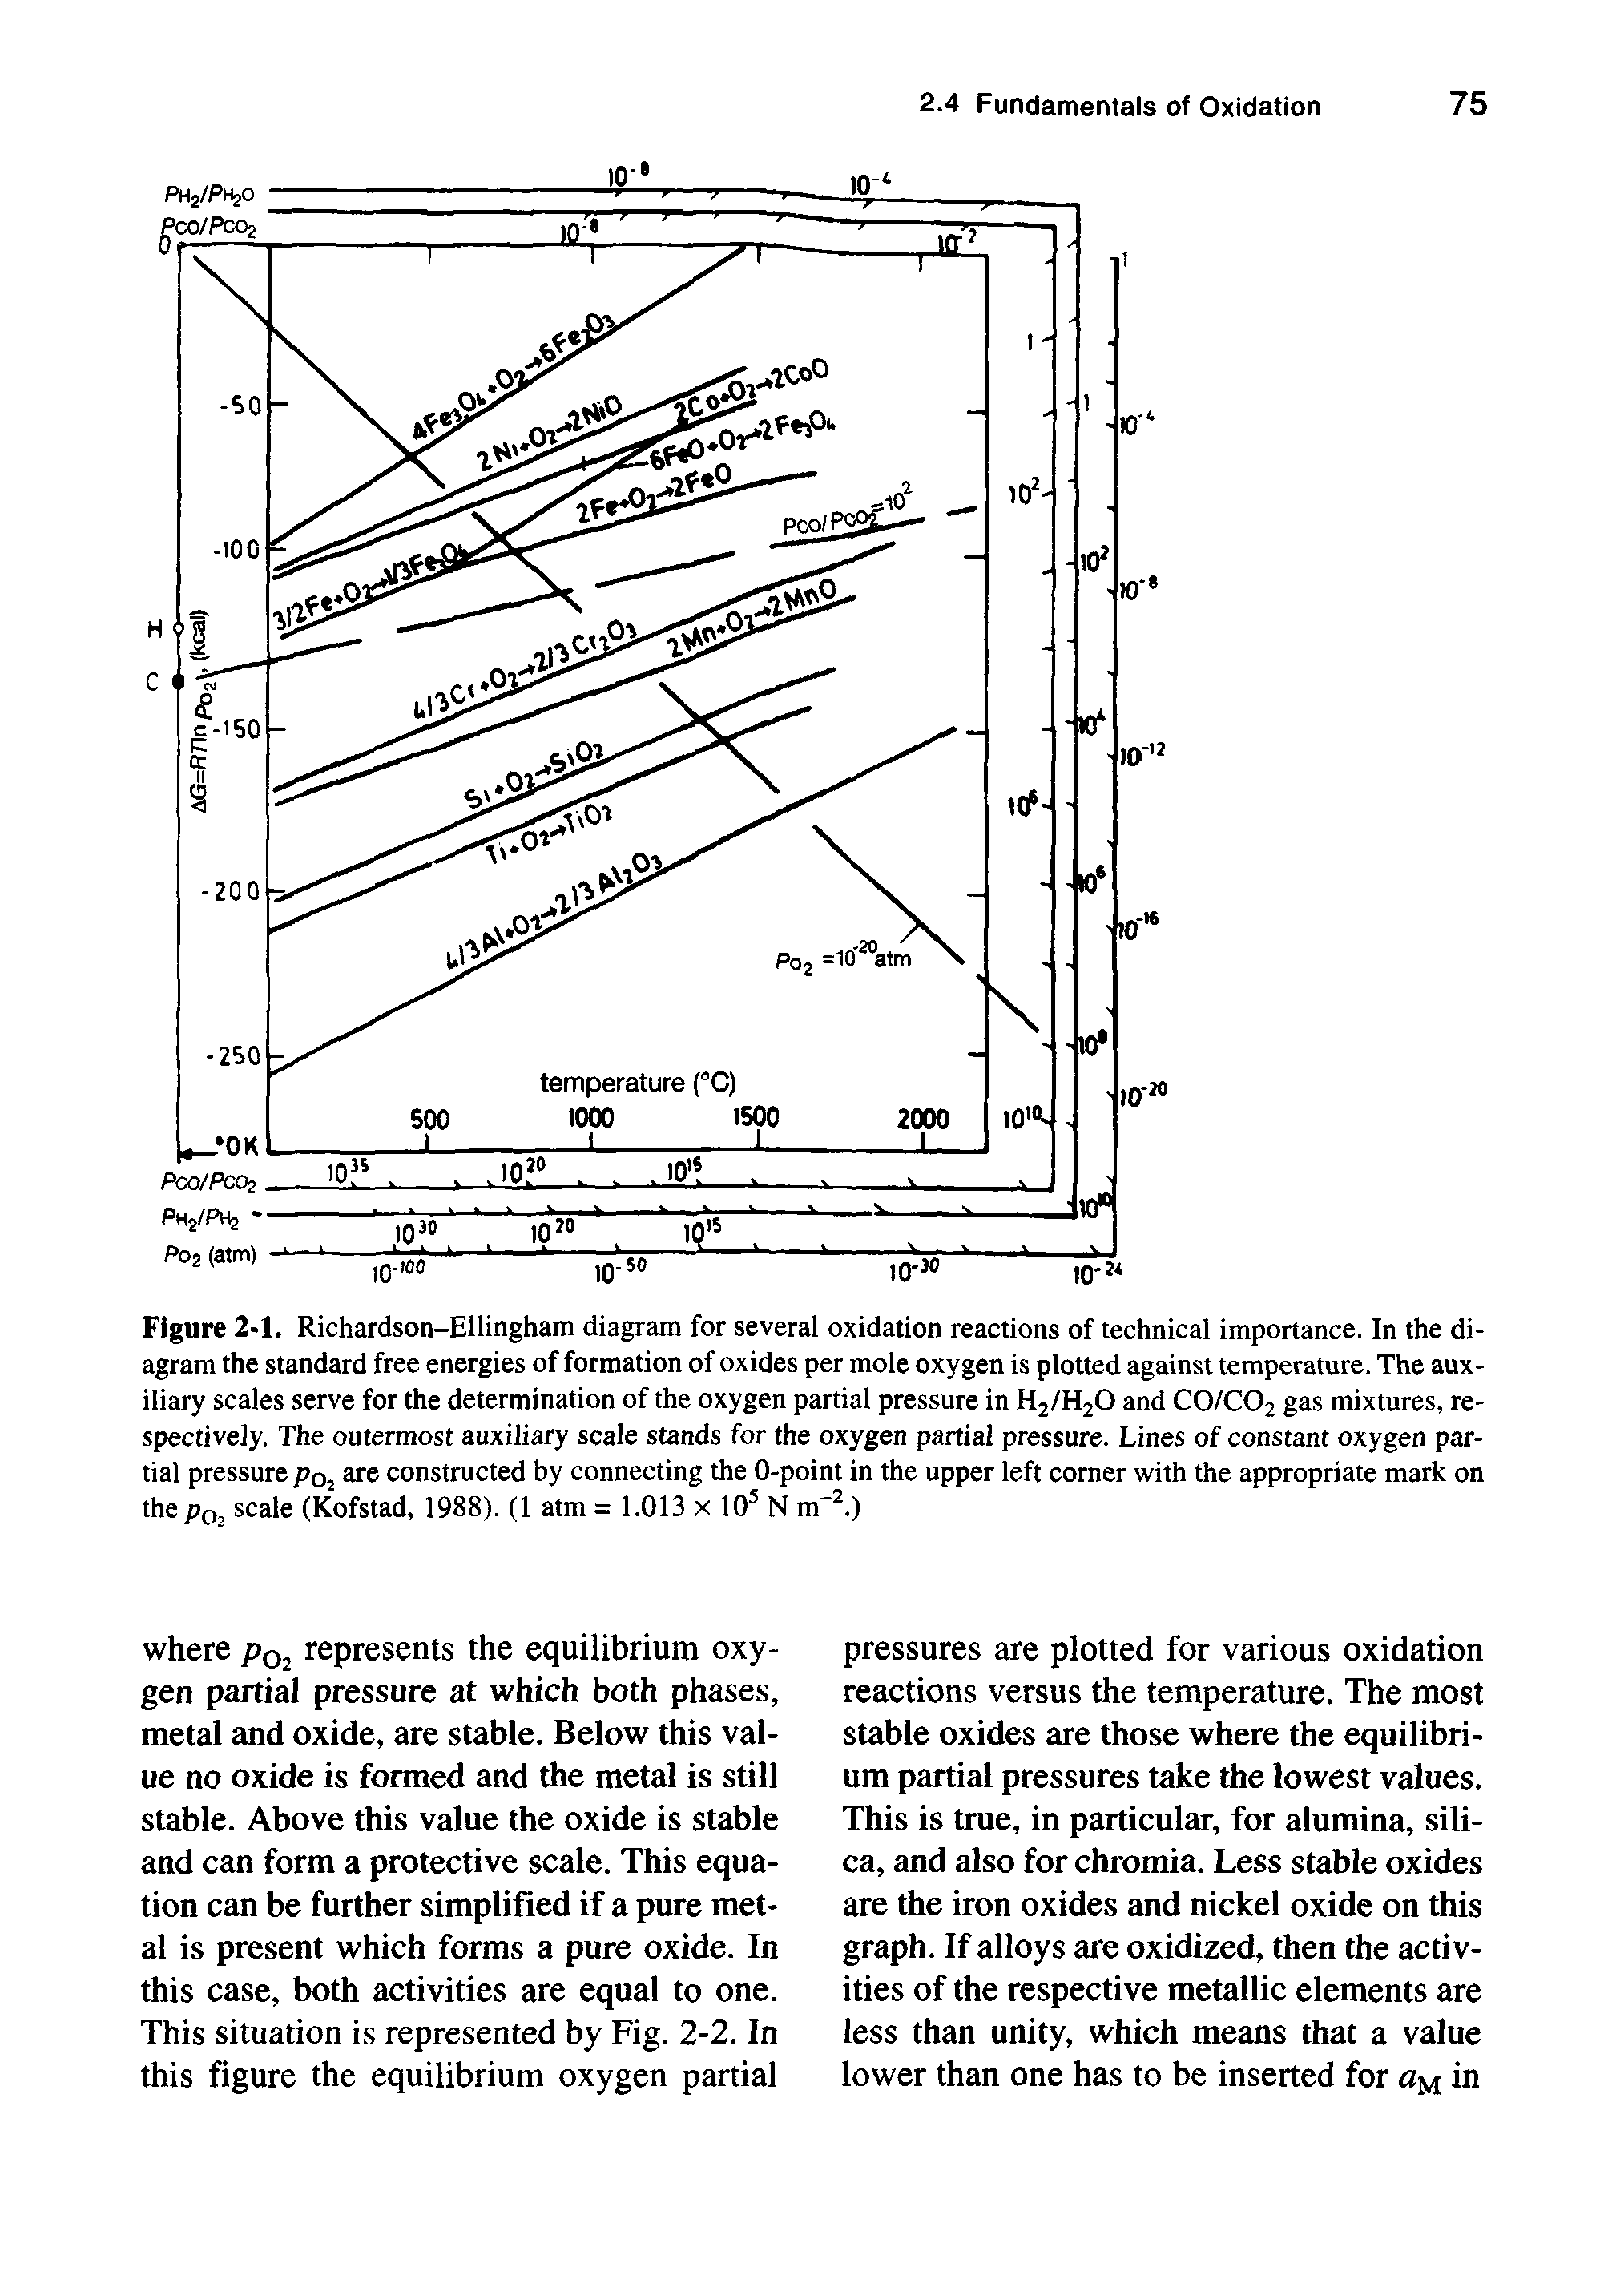 Figure 2-1. Richardson-Ellingham diagram for several oxidation reactions of technical importance. In the diagram the standard free energies of formation of oxides per mole oxygen is plotted against temperature. The auxiliary scales serve for the determination of the oxygen partial pressure in Hj/HjO and CO/CO2 gas mixtures, respectively. The outermost auxiliary scale stands for the oxygen partial pressure. Lines of constant oxygen partial pressure poj are constructed by connecting the 0-point in the upper left corner with the appropriate mark on the P02 scale (Kofstad, 1988). (1 atm = 1.013 x lO N m". )...